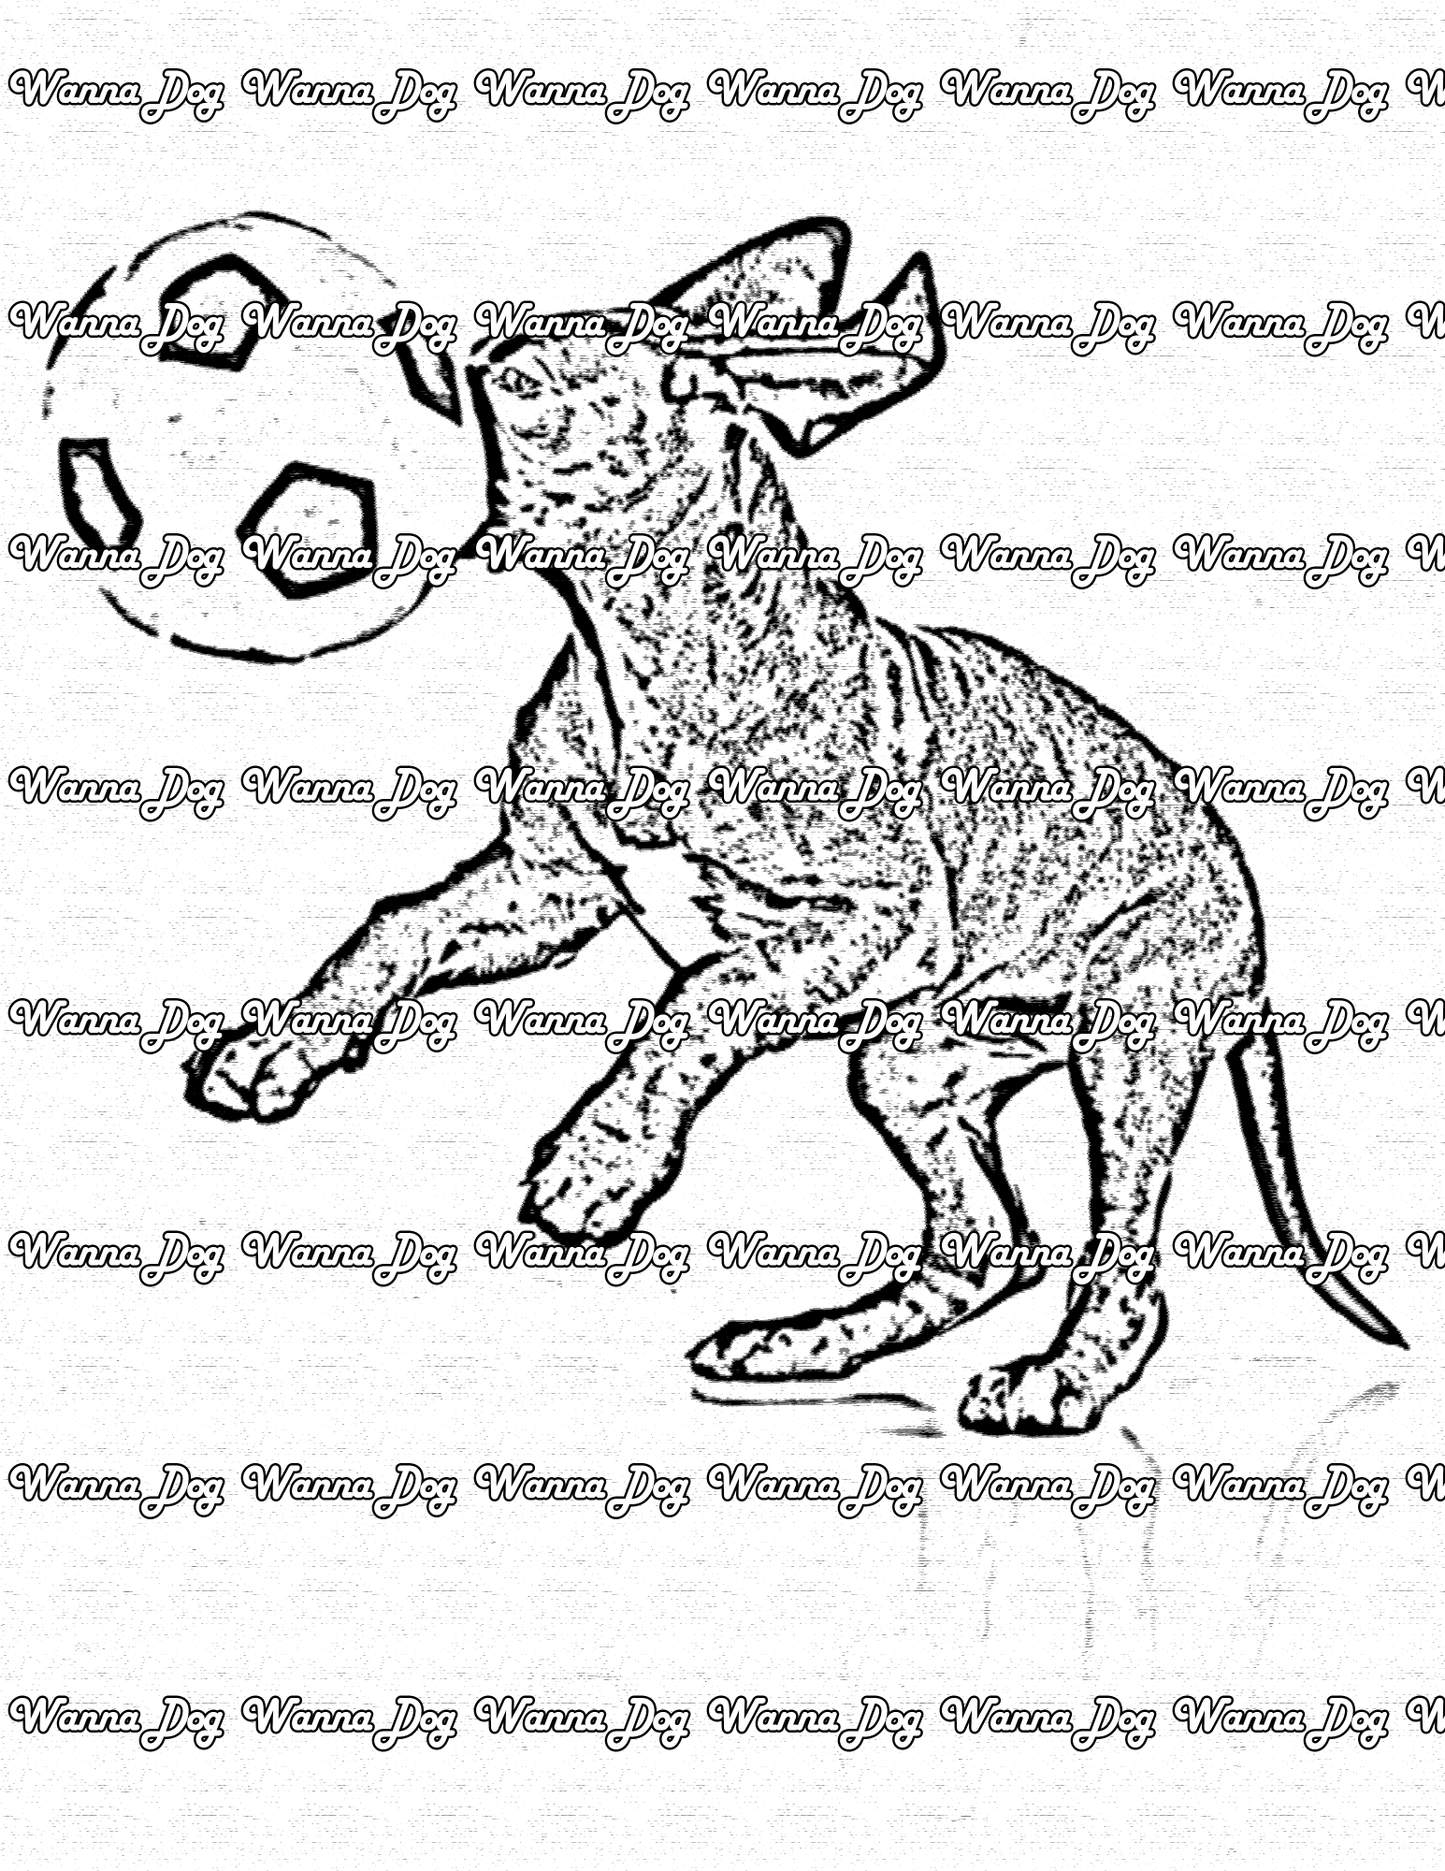 Great Dane Coloring Page of a Great Dane playing with a soccer ball